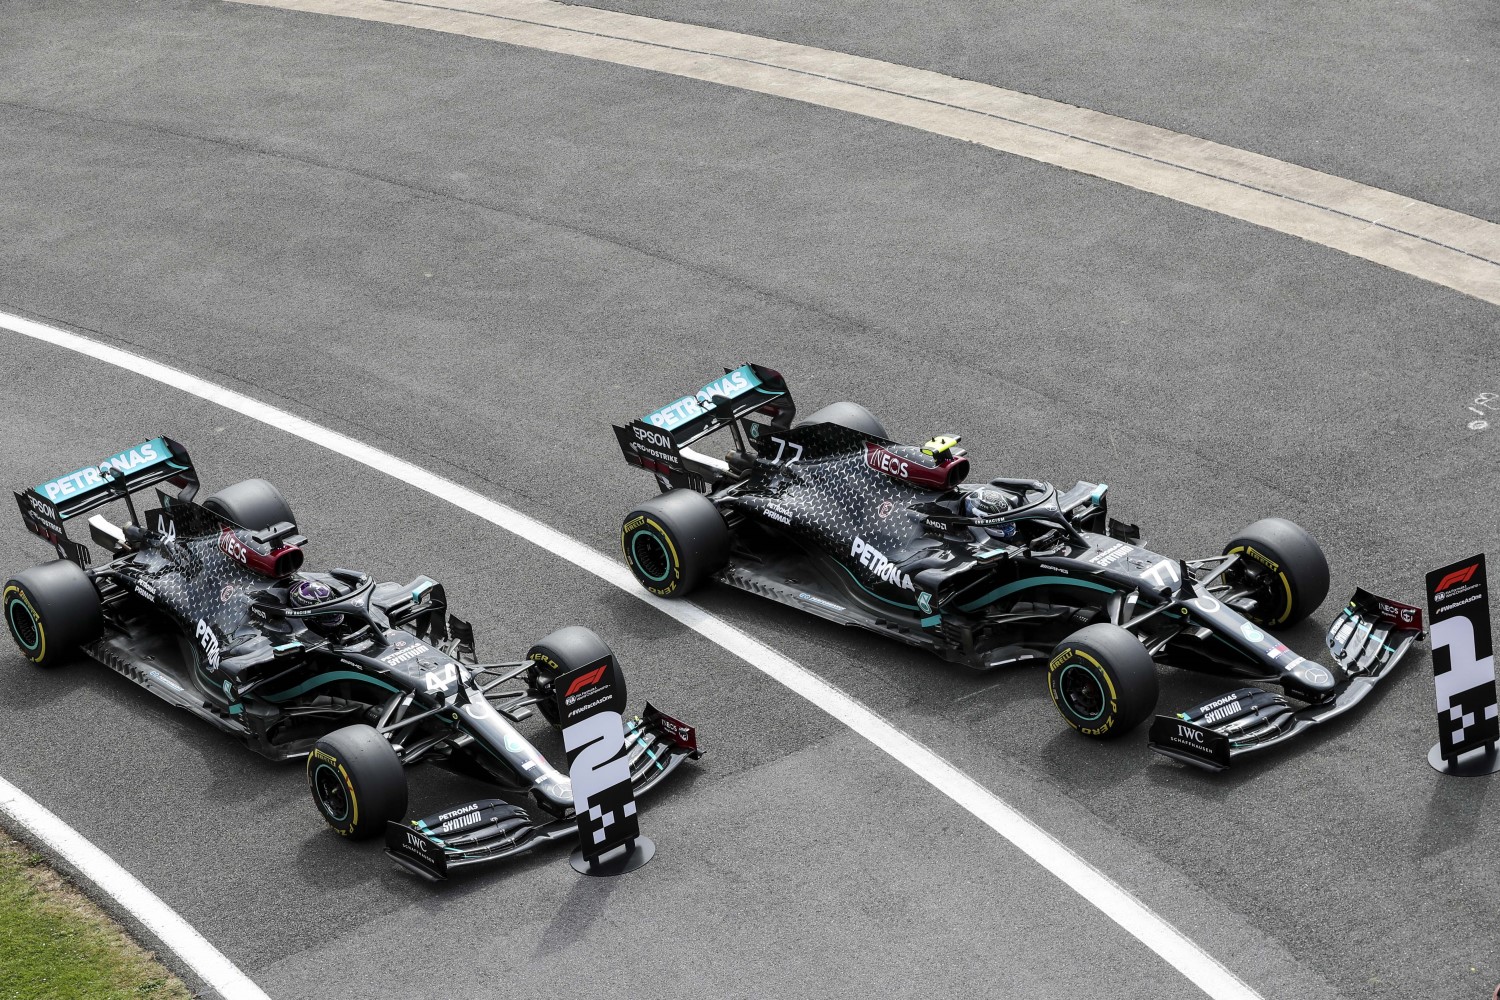 A Mercedes car will win, but which one?